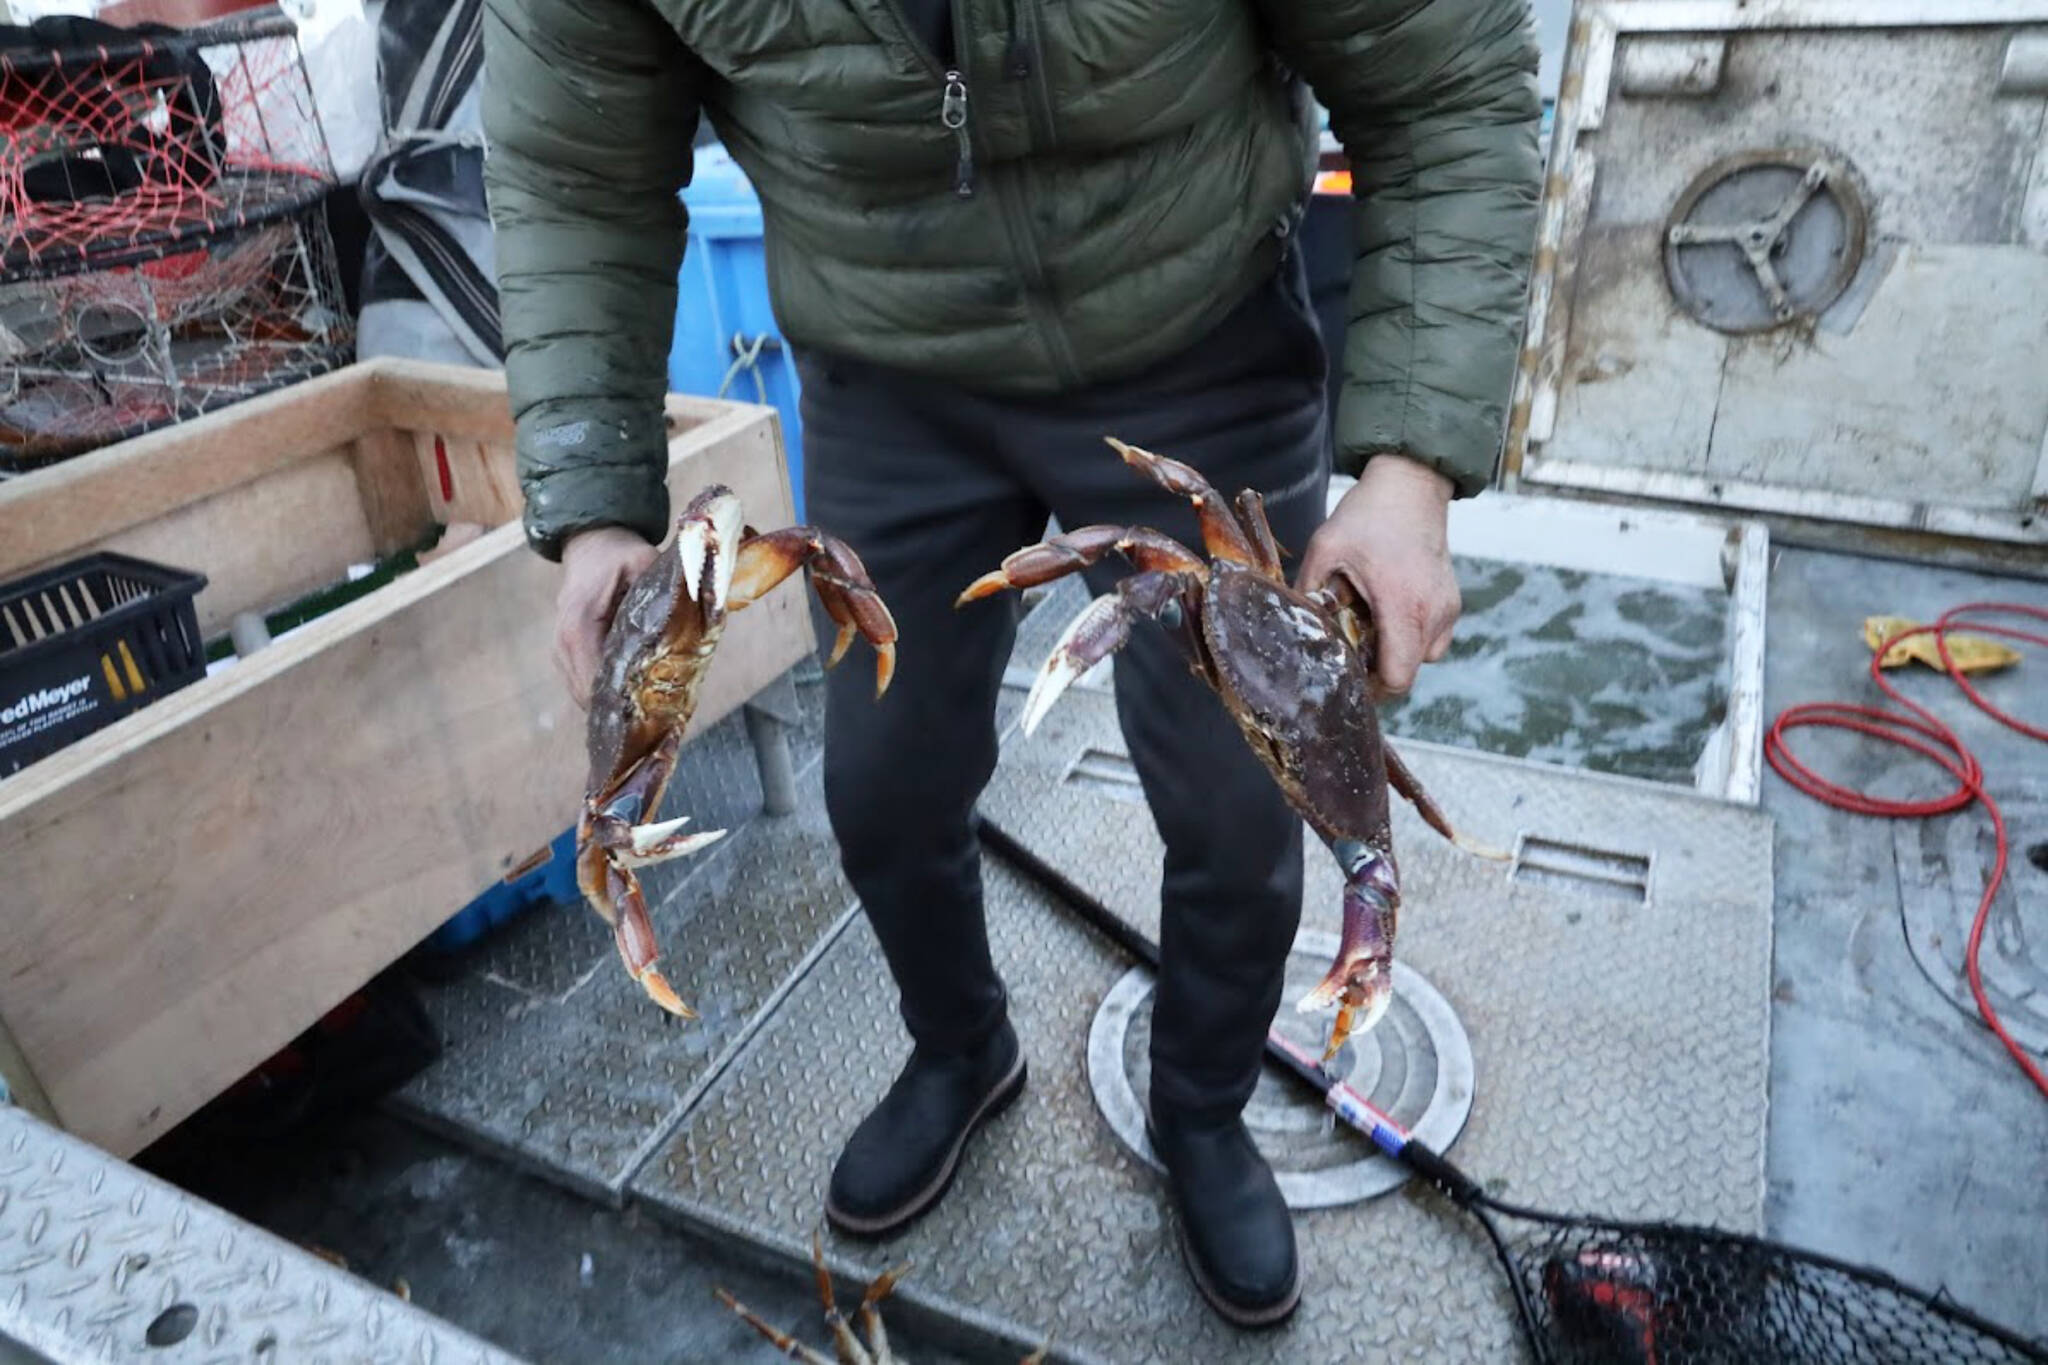 Clarise Larson / Juneau Empire
Charlie Blattner, a Juneau-based Dungeness crab fisherman, holds two live Dungeness crabs he caught in the past few days around the Juneau area. Blattner said fall Dungeness crab harvest for his boat has been “hit or miss.”